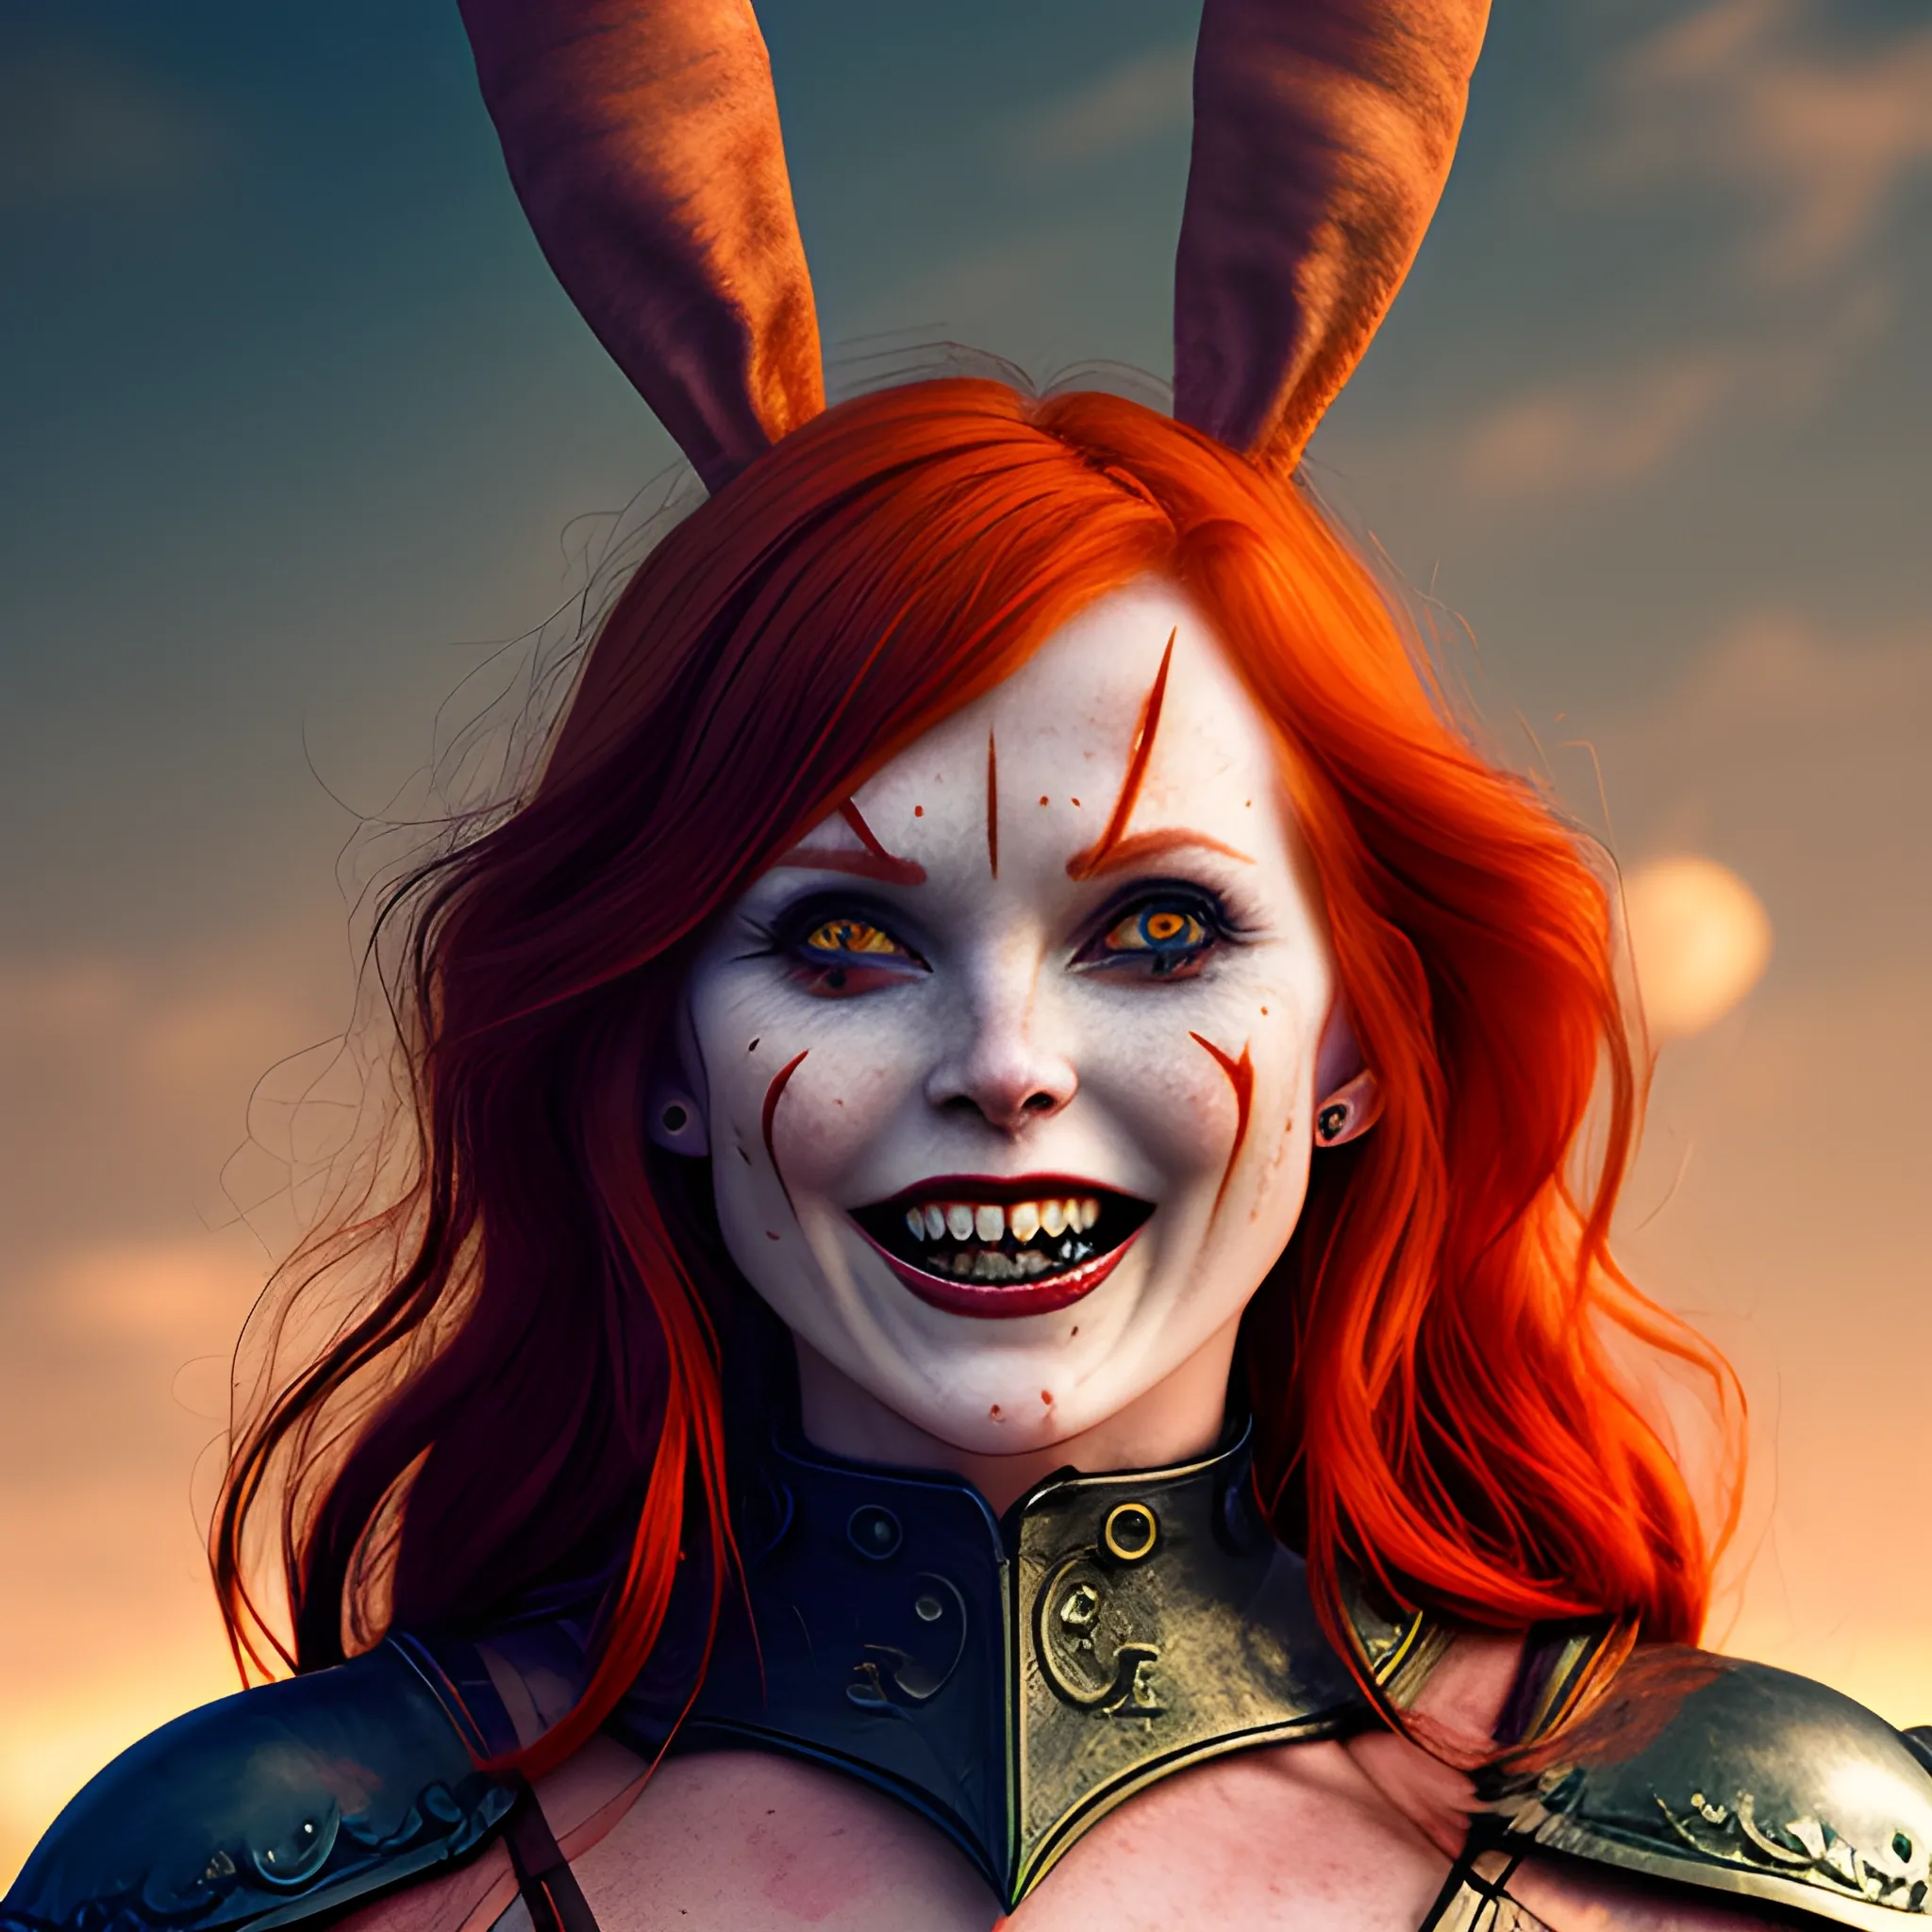 Woman warrior, bunny ears, demon horns on jaw,
 redhead, smiling